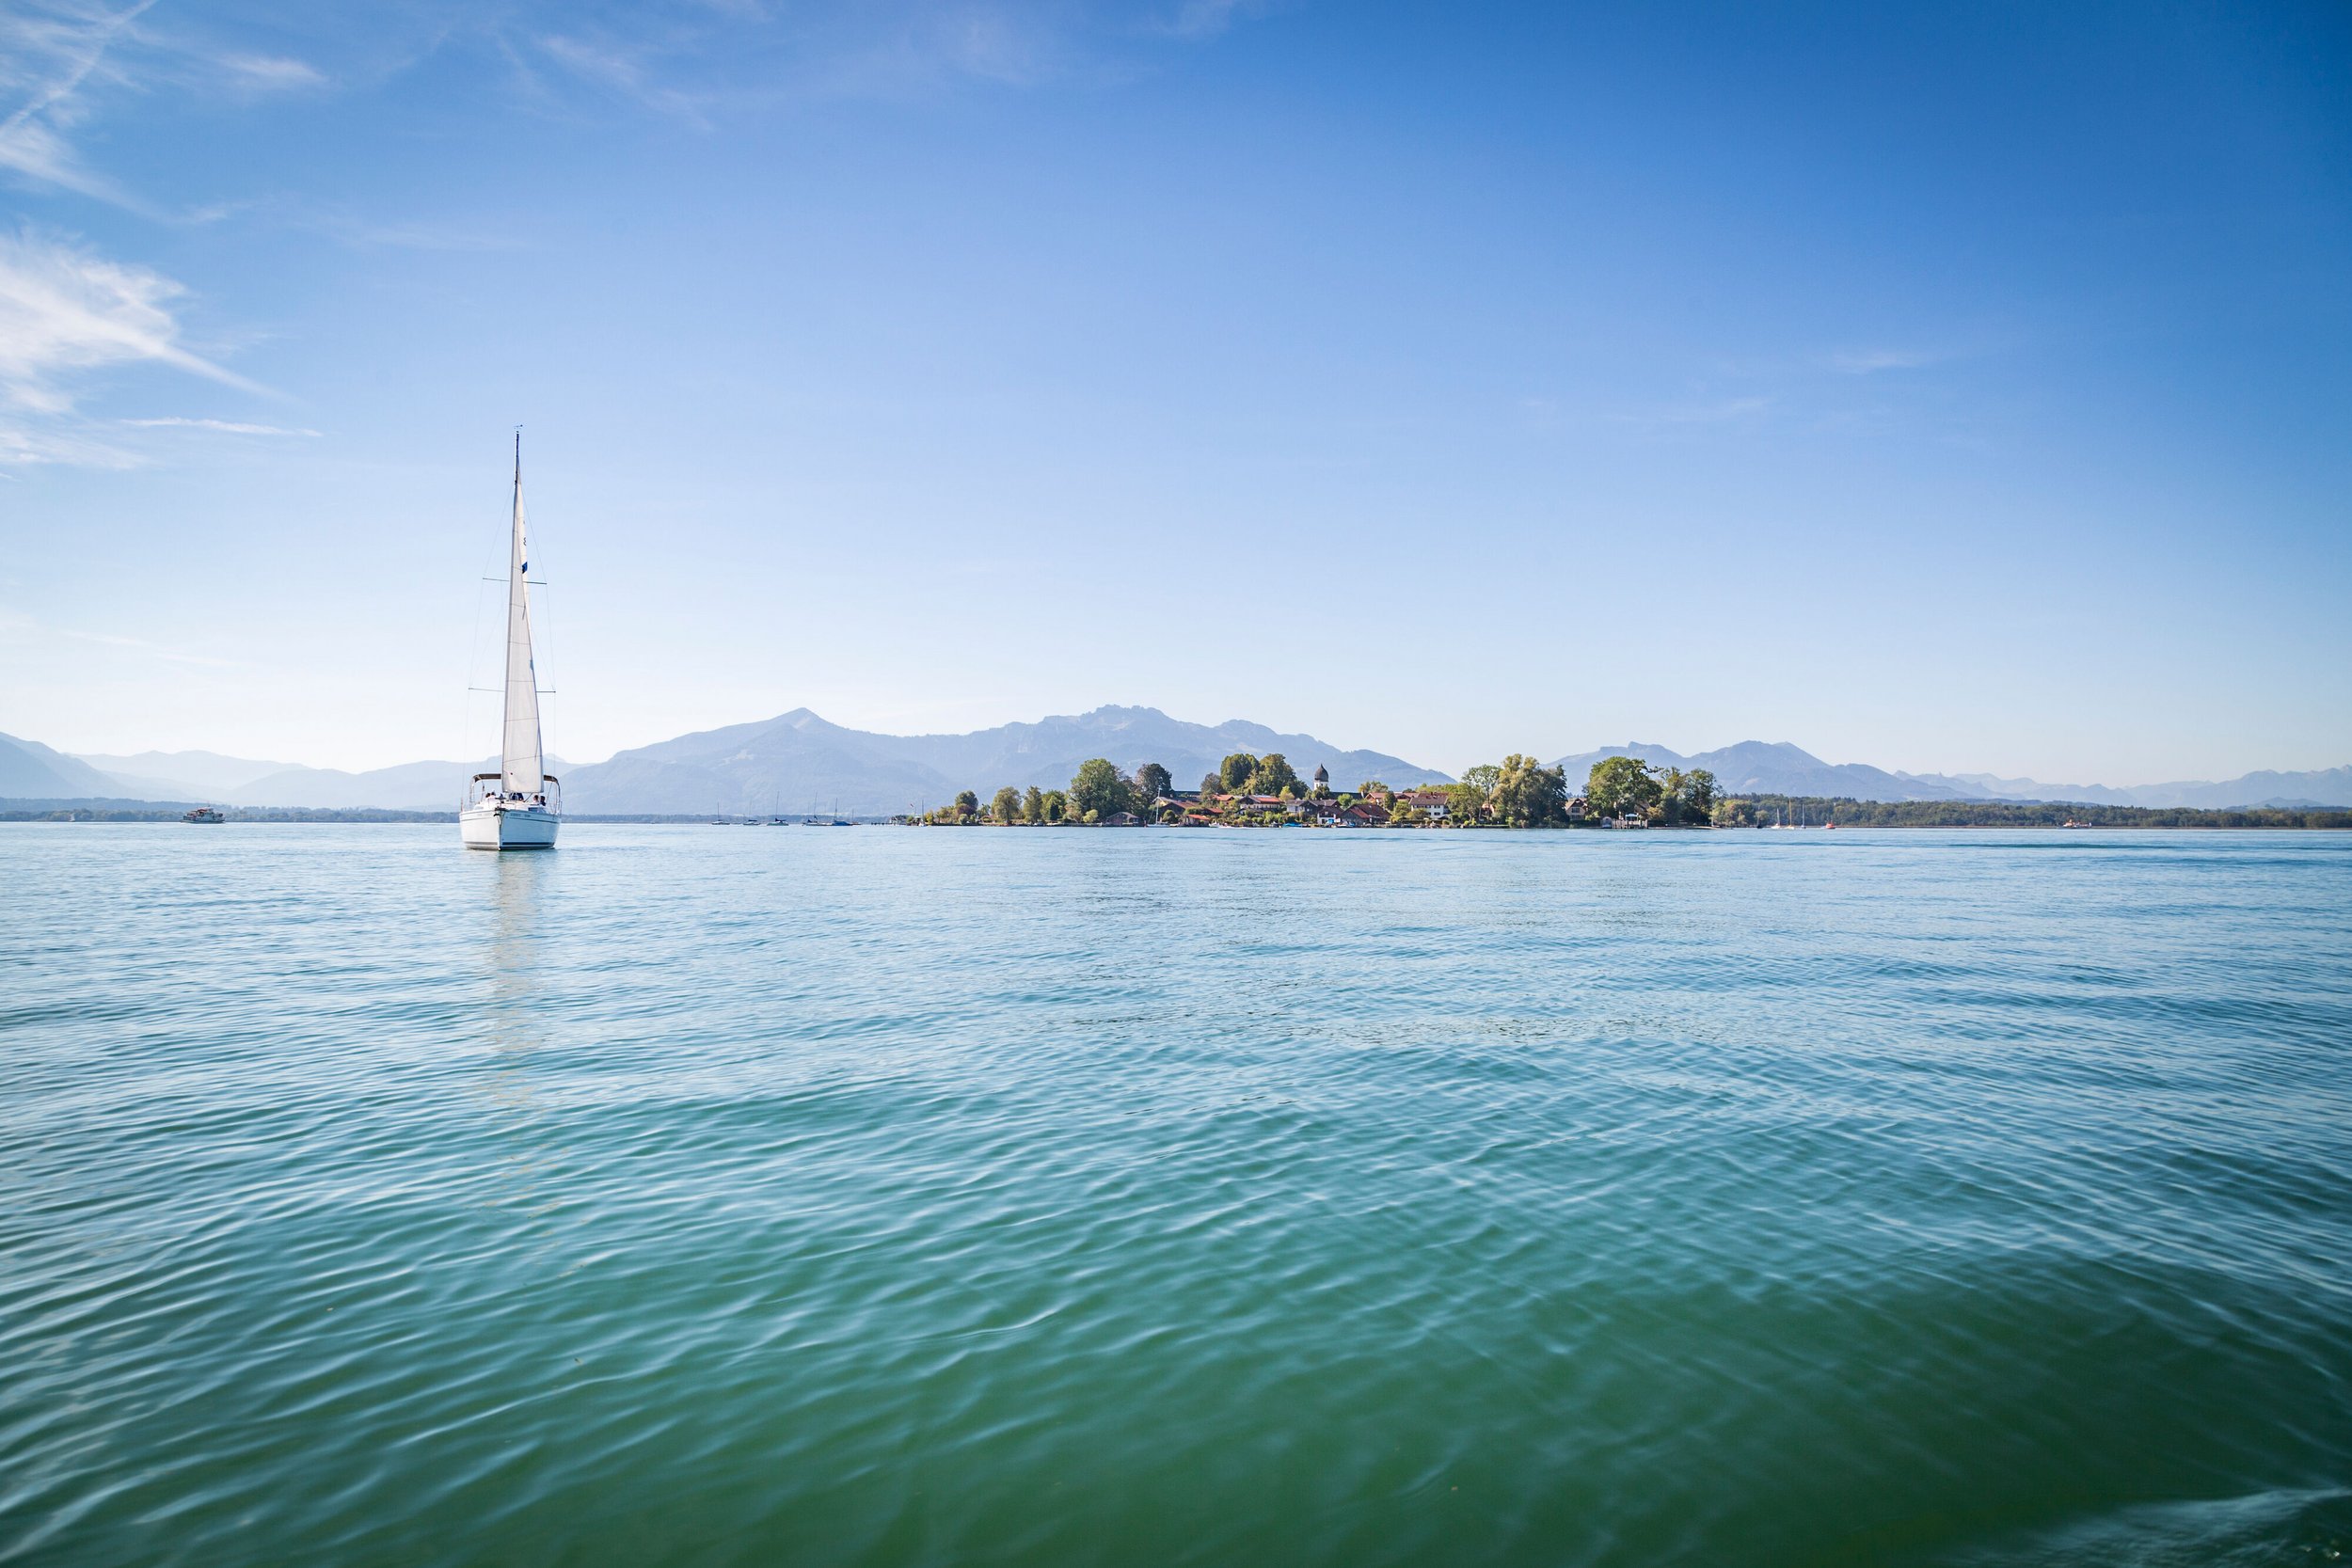 Sailing on the Chiemsee